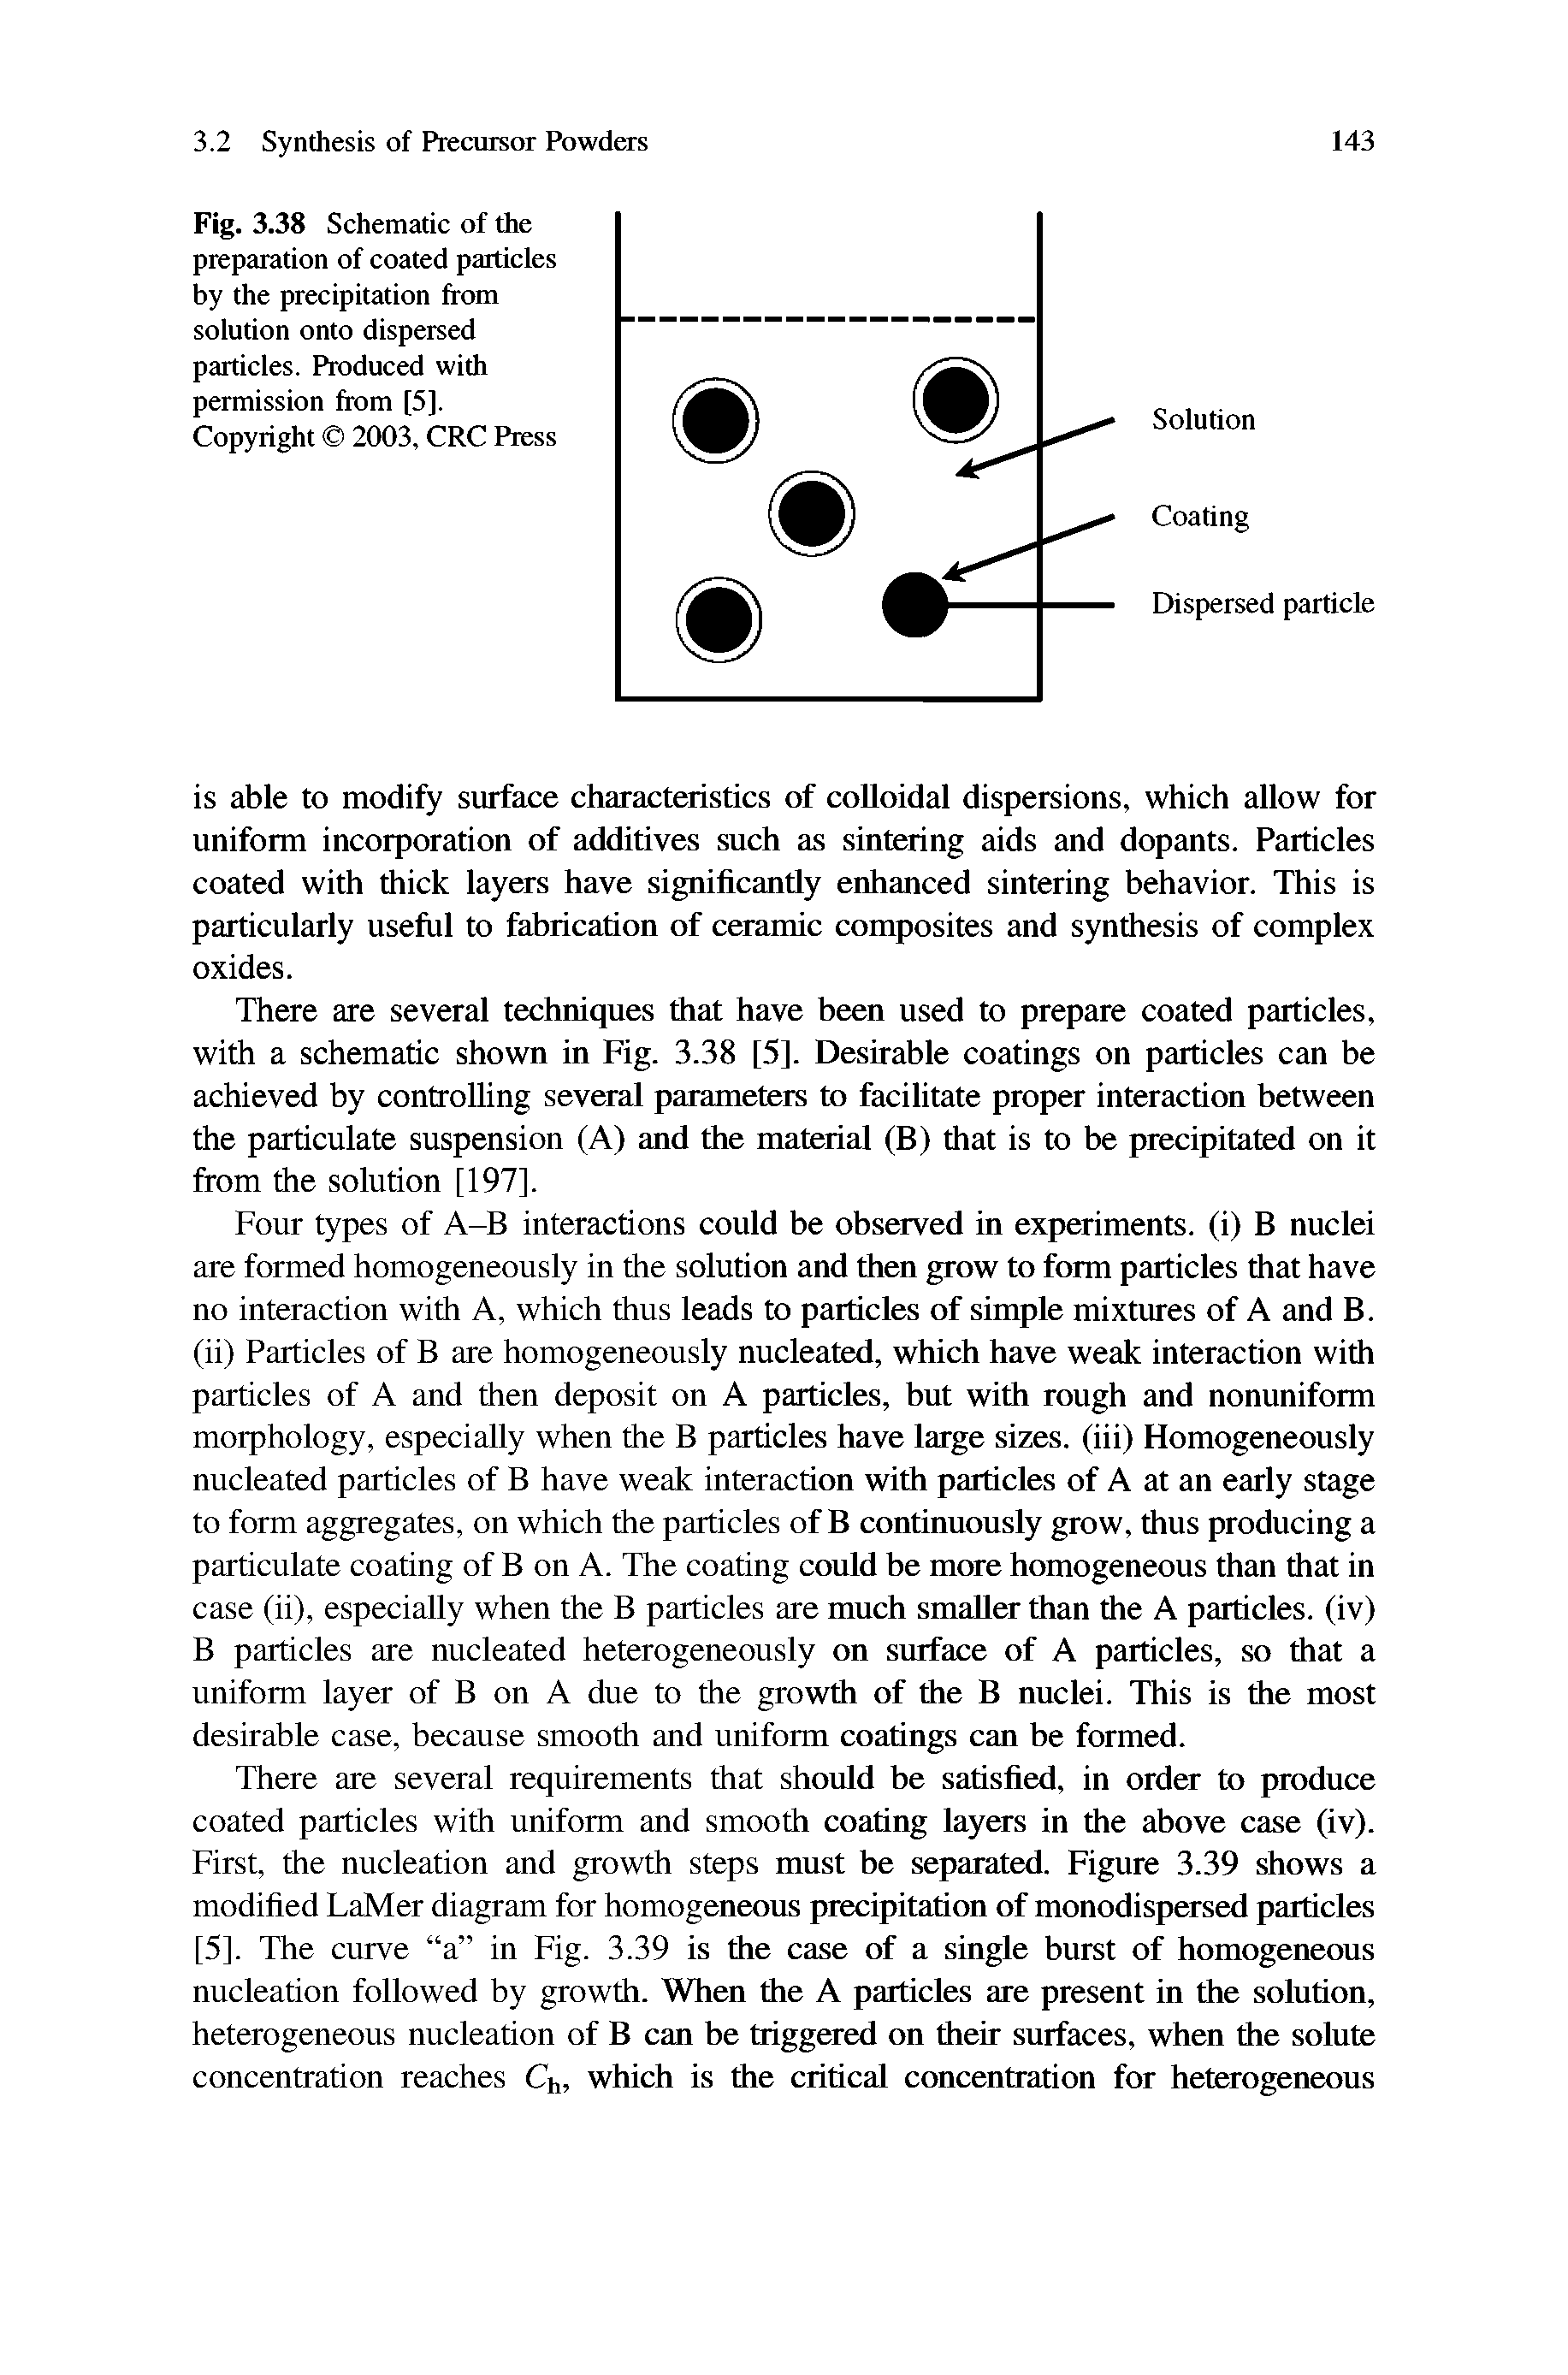 Fig. 3.38 Schematic of the preparation of coated particles by the precipitation from solution onto dispersed particles. Produced with permission from [5]. Copyright 2003, CRC Press...